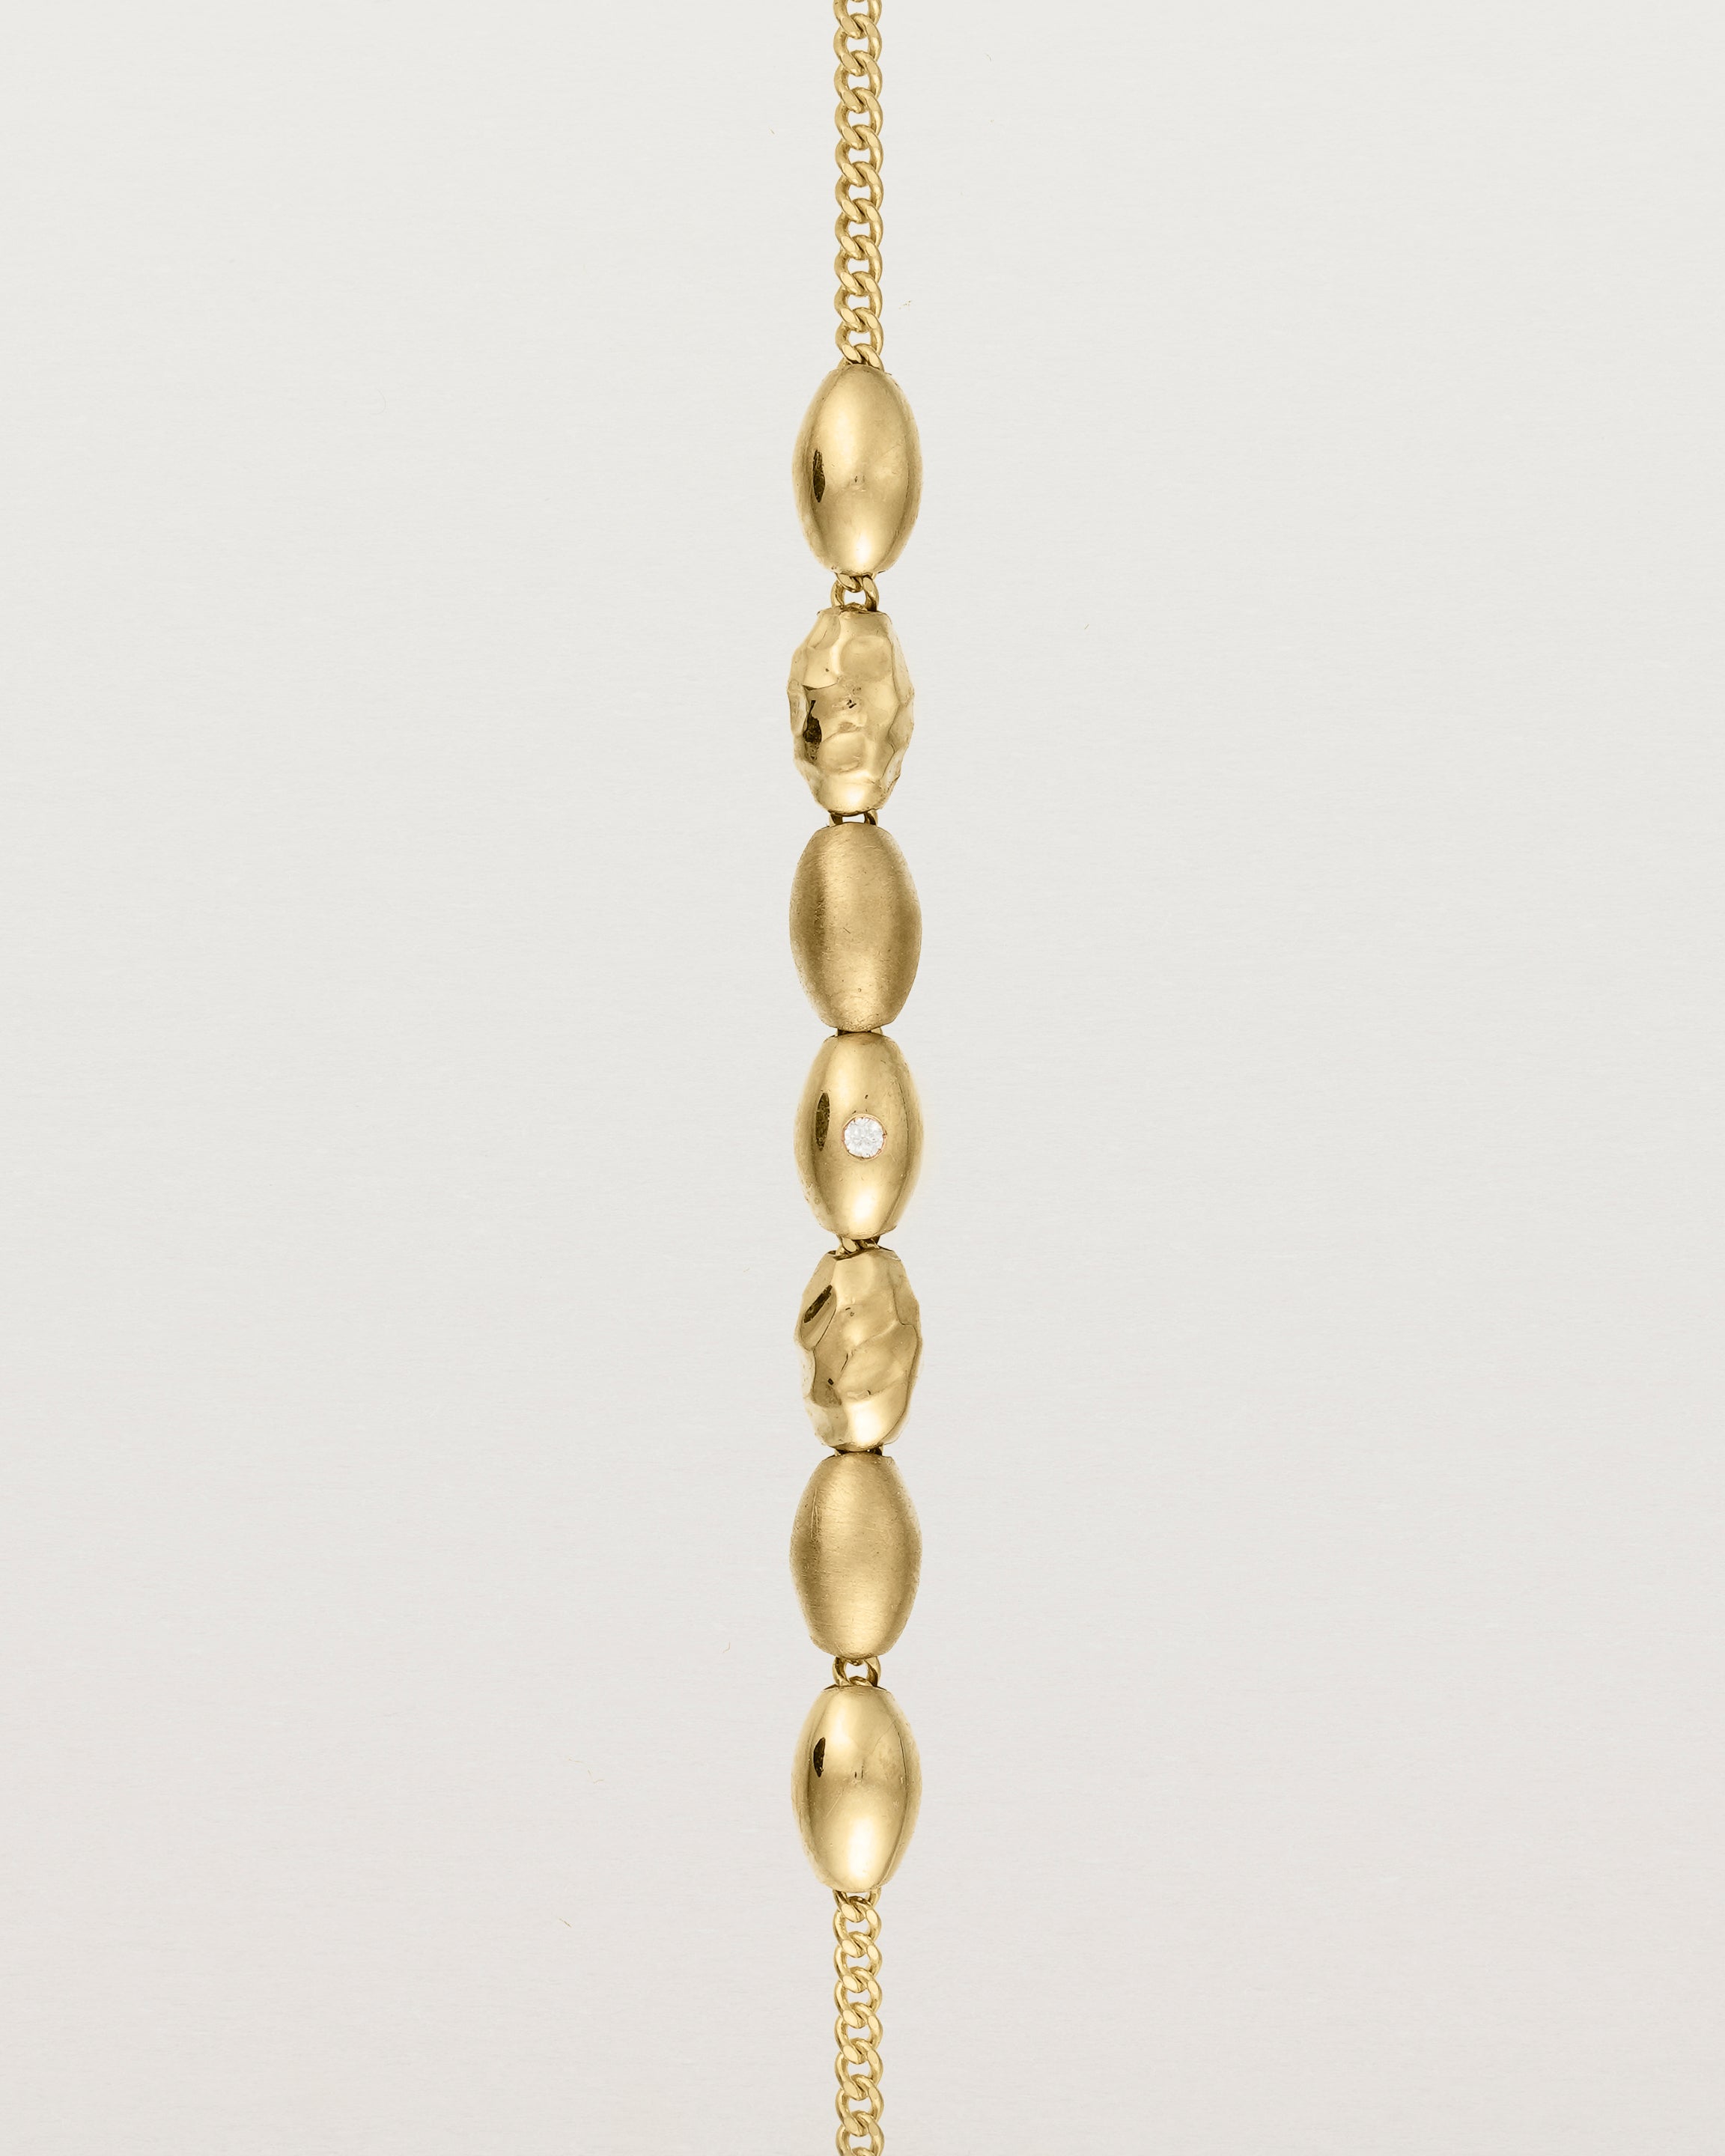 yellow gold Chain featuring seven charms